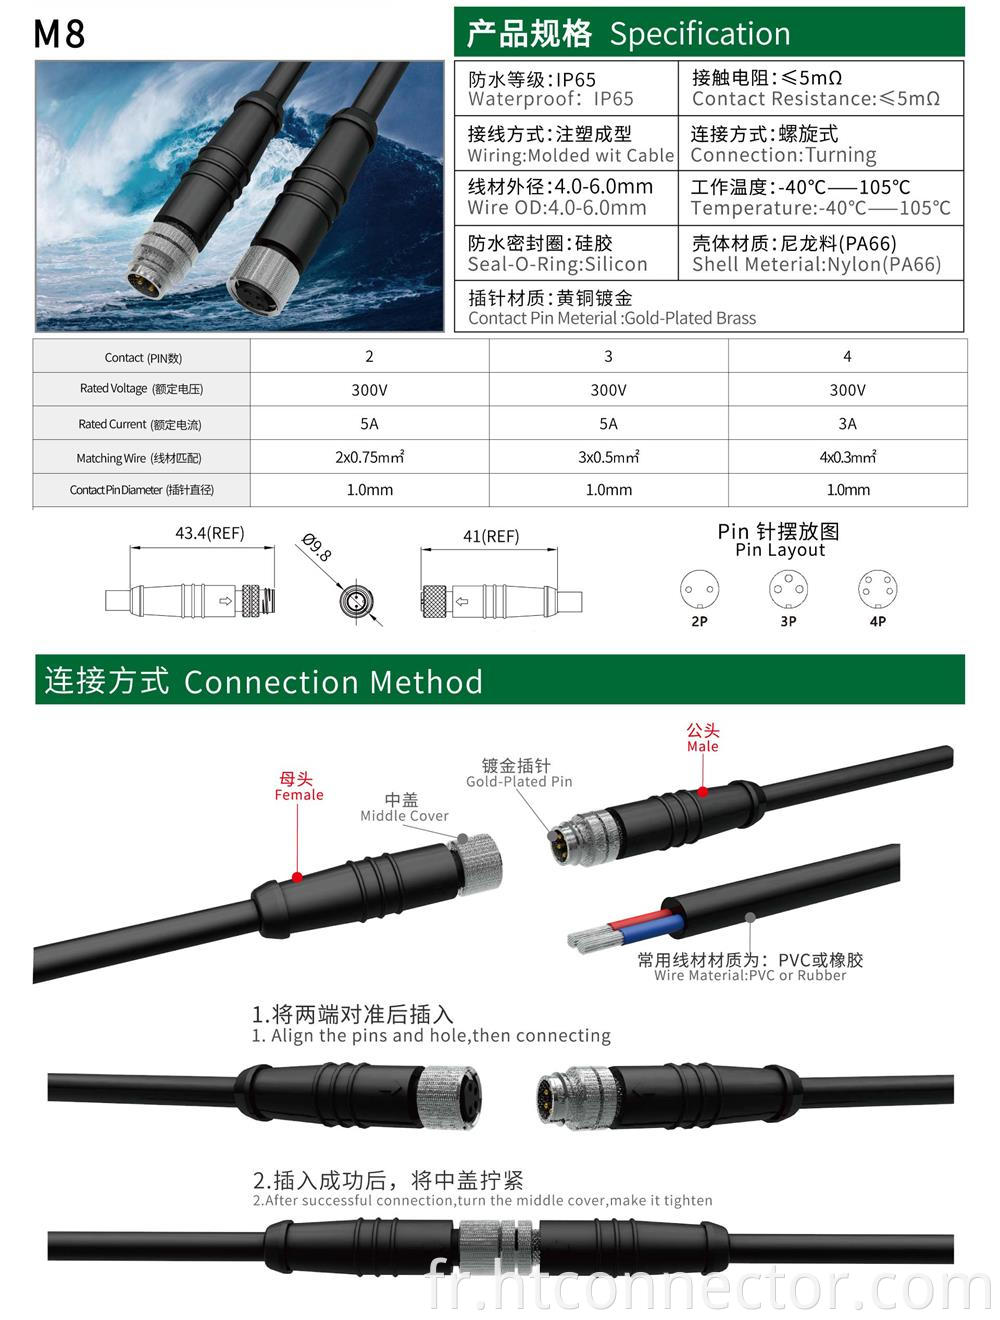 3P Curved needle waterproof connector